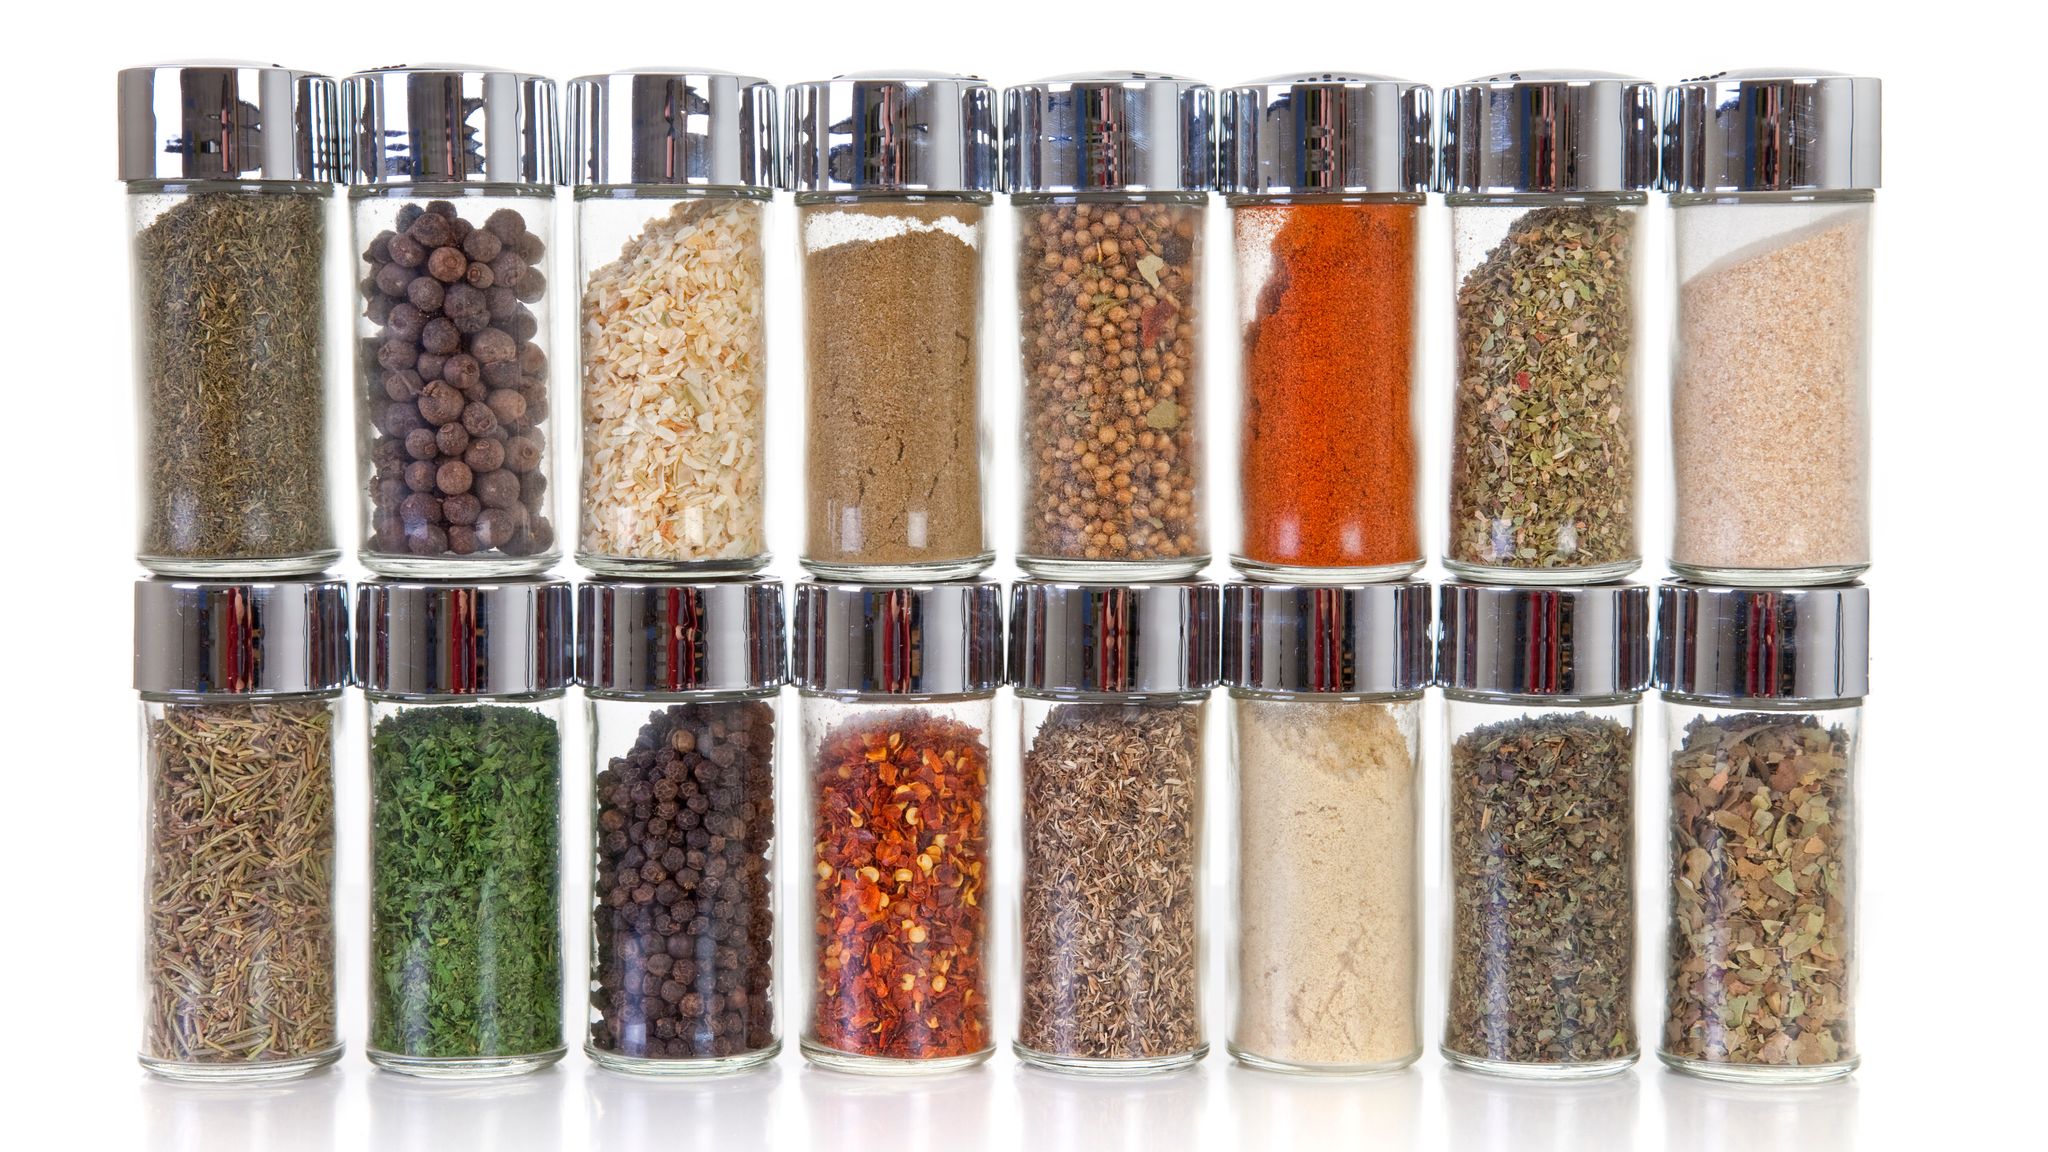 The Plastic Sifter Tops of Your Spice Jars are Useless, Take Them Off